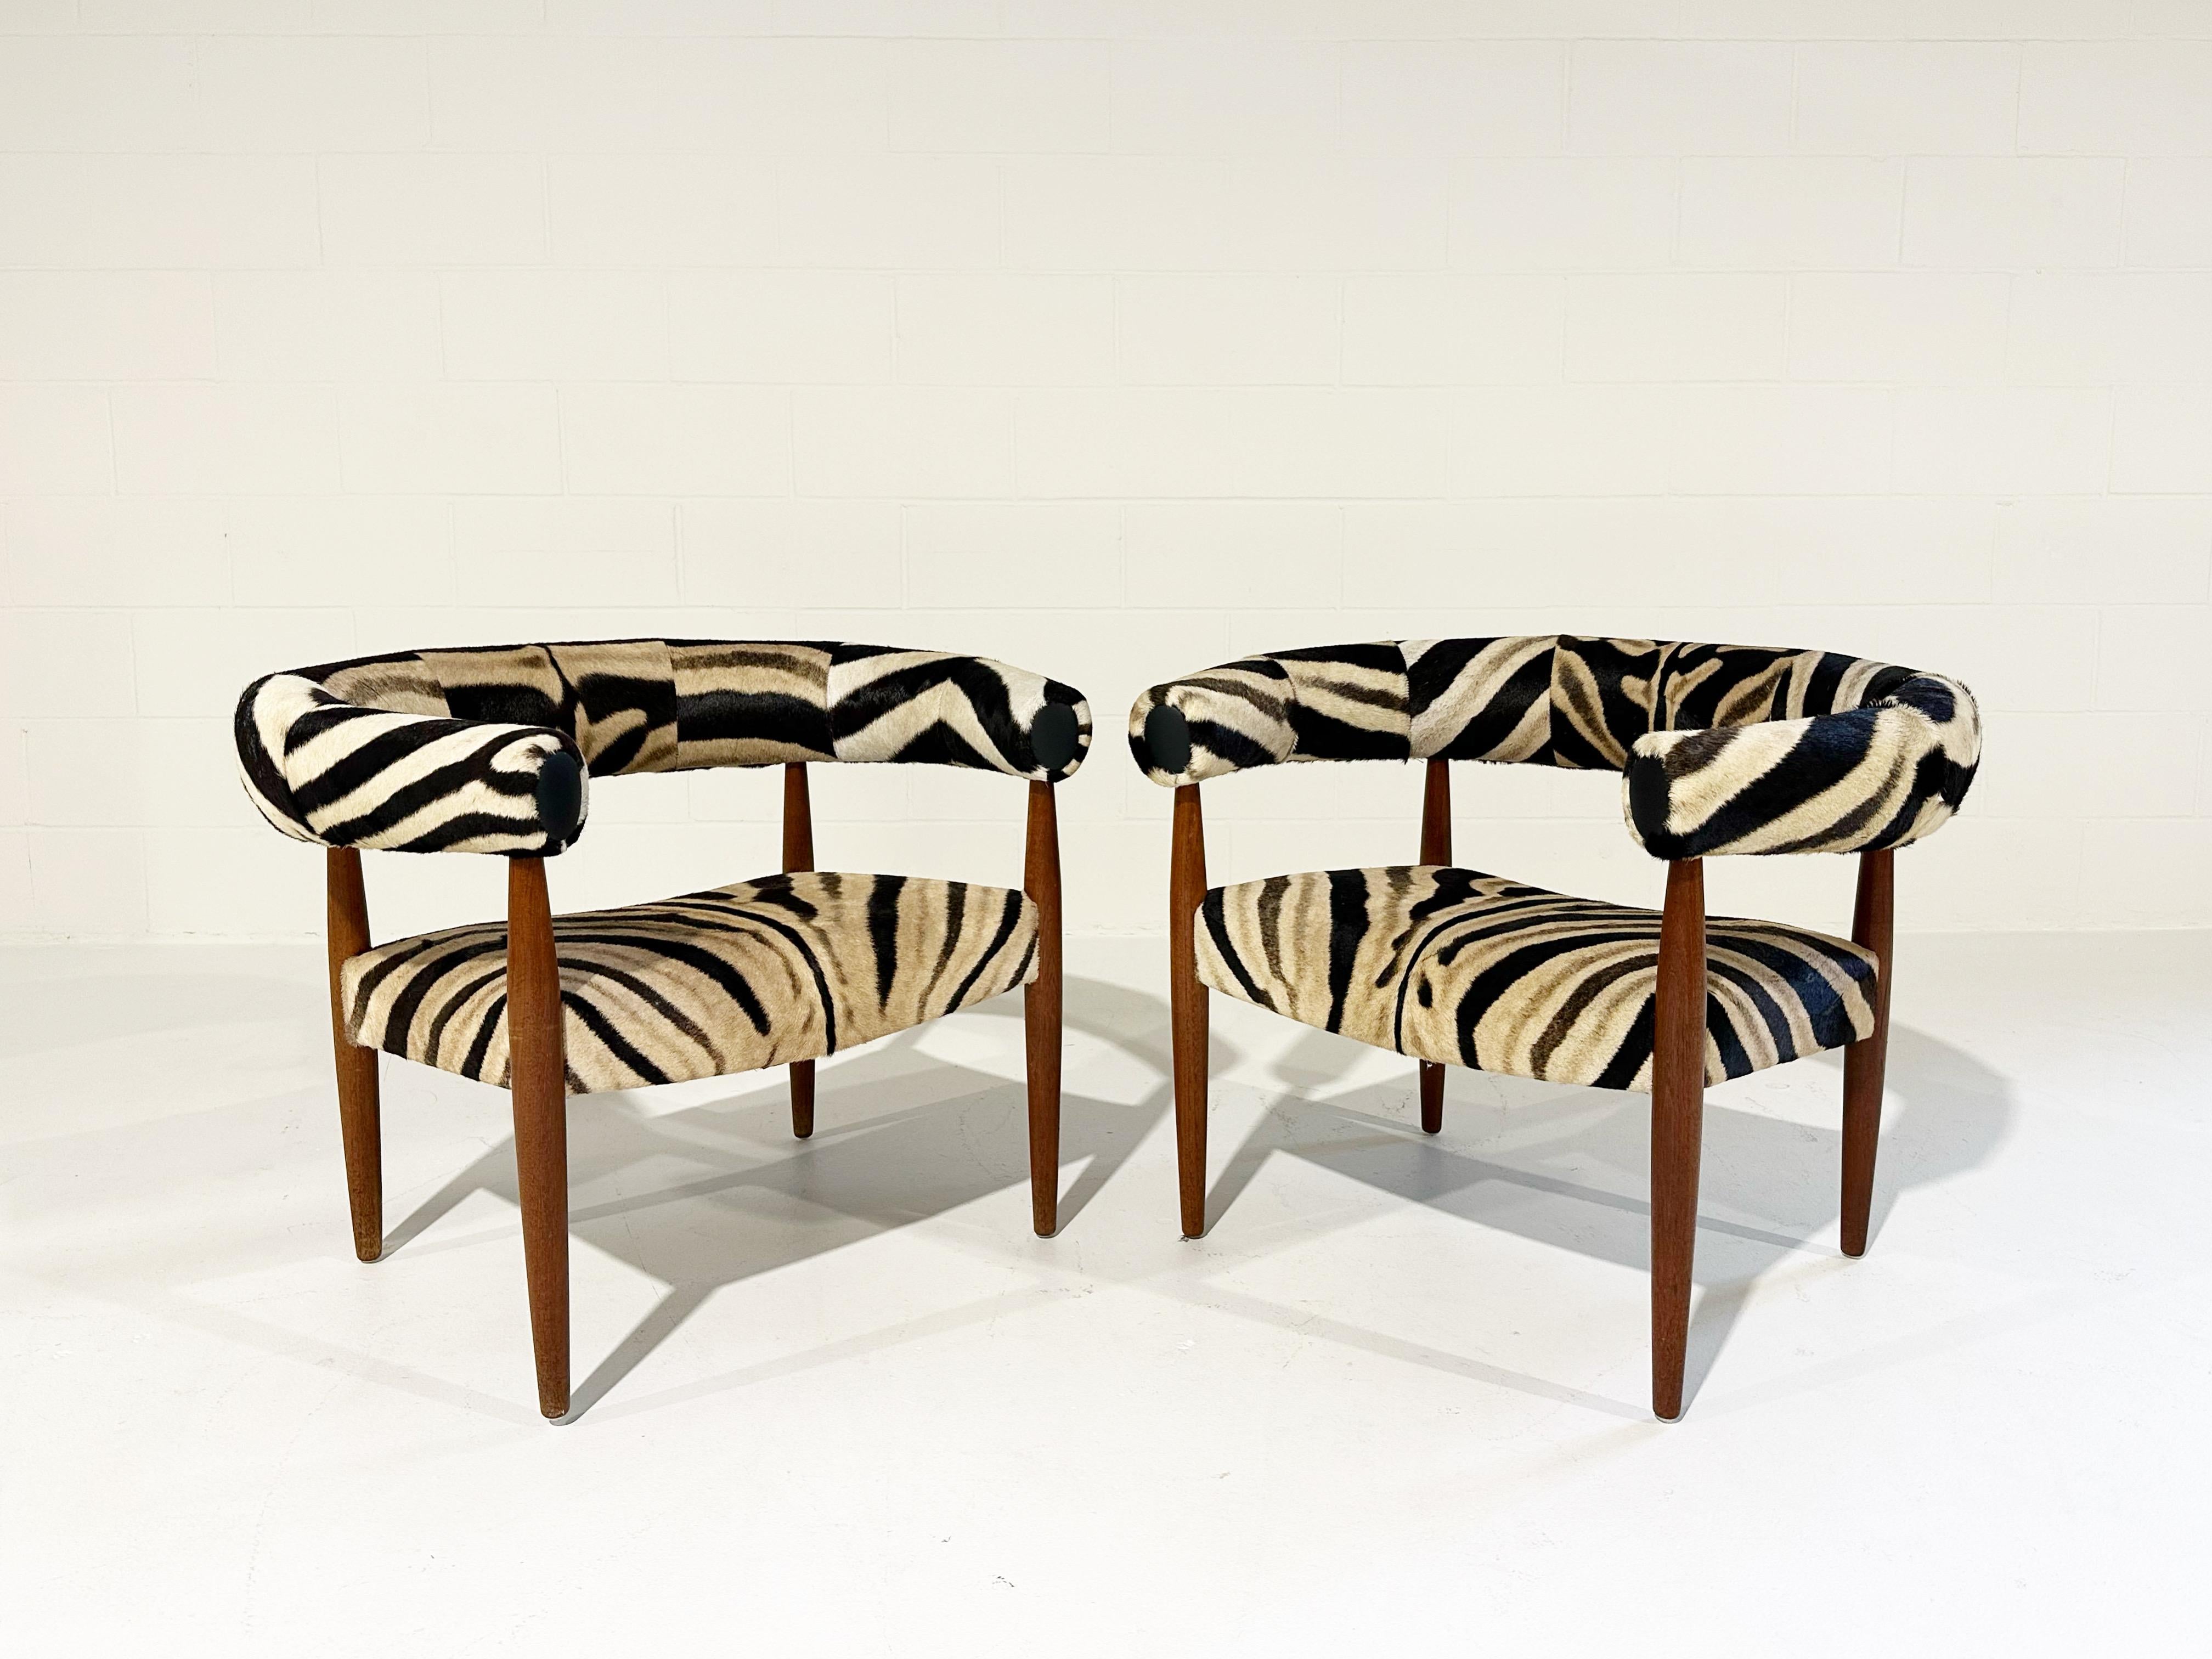 Vintage Nanna and Jorgen Ditzel Ring Lounge Chairs in Zebra Hide In Good Condition For Sale In SAINT LOUIS, MO